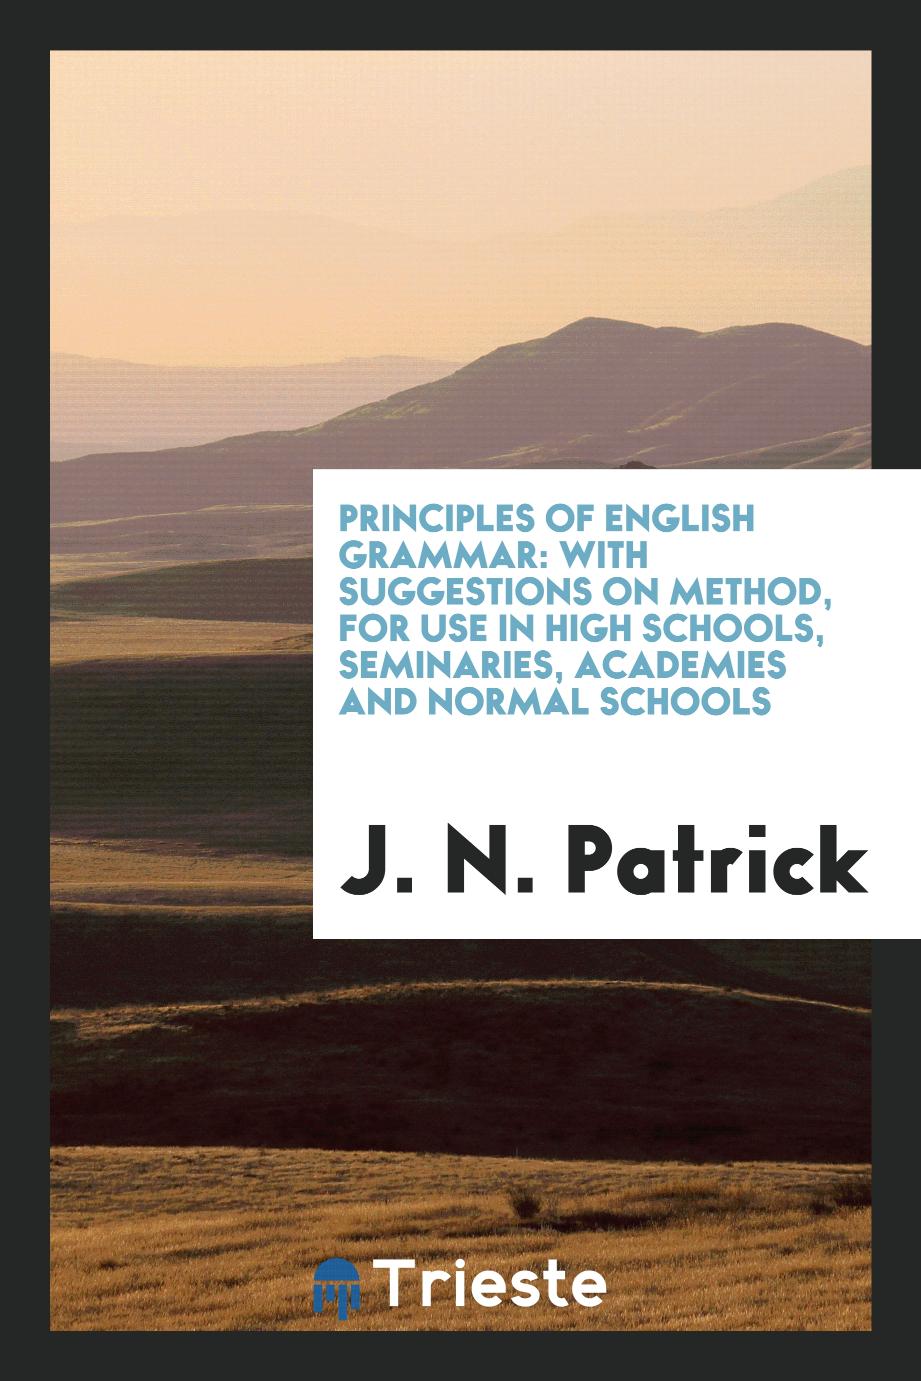 Principles of English Grammar: With Suggestions on Method, for Use in High Schools, Seminaries, Academies and Normal Schools